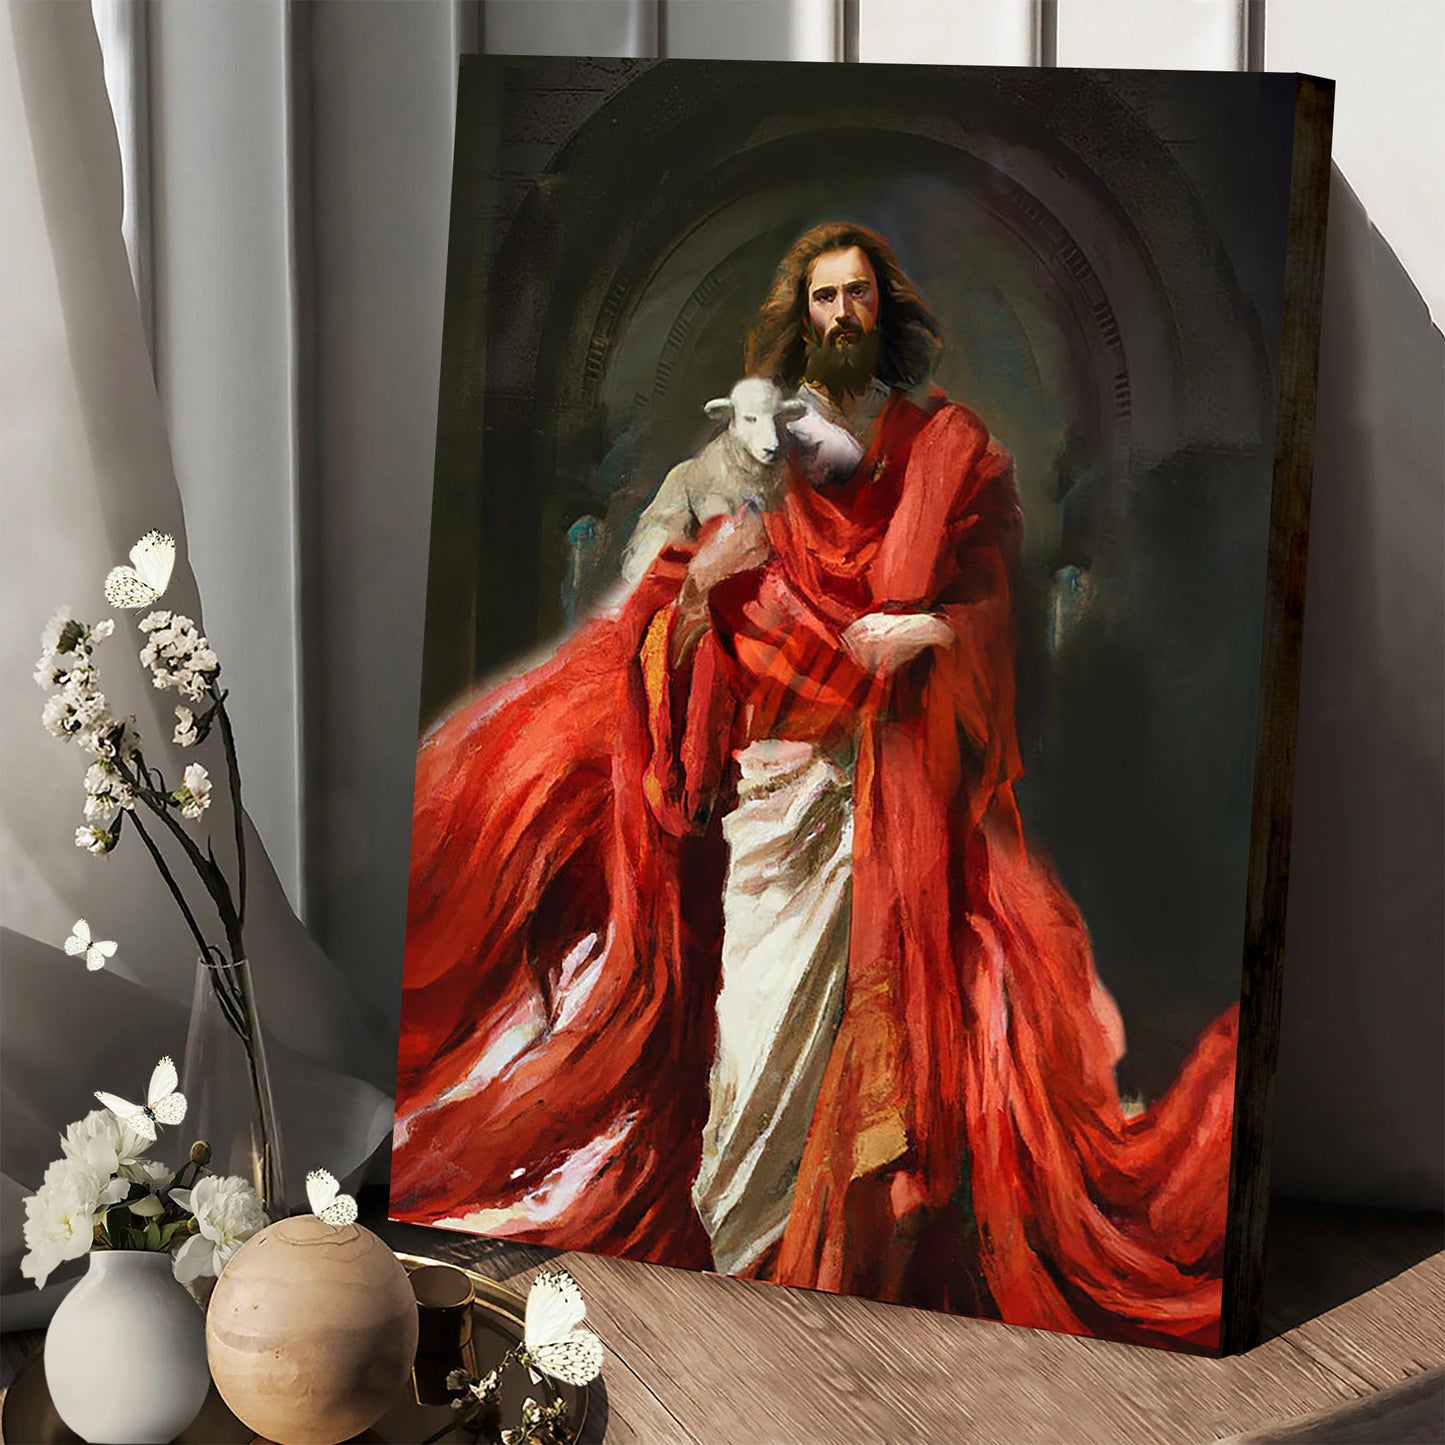 Jesus The Shepherd  Canvas Wall Art - Jesus Canvas Pictures - Christian Wall Art